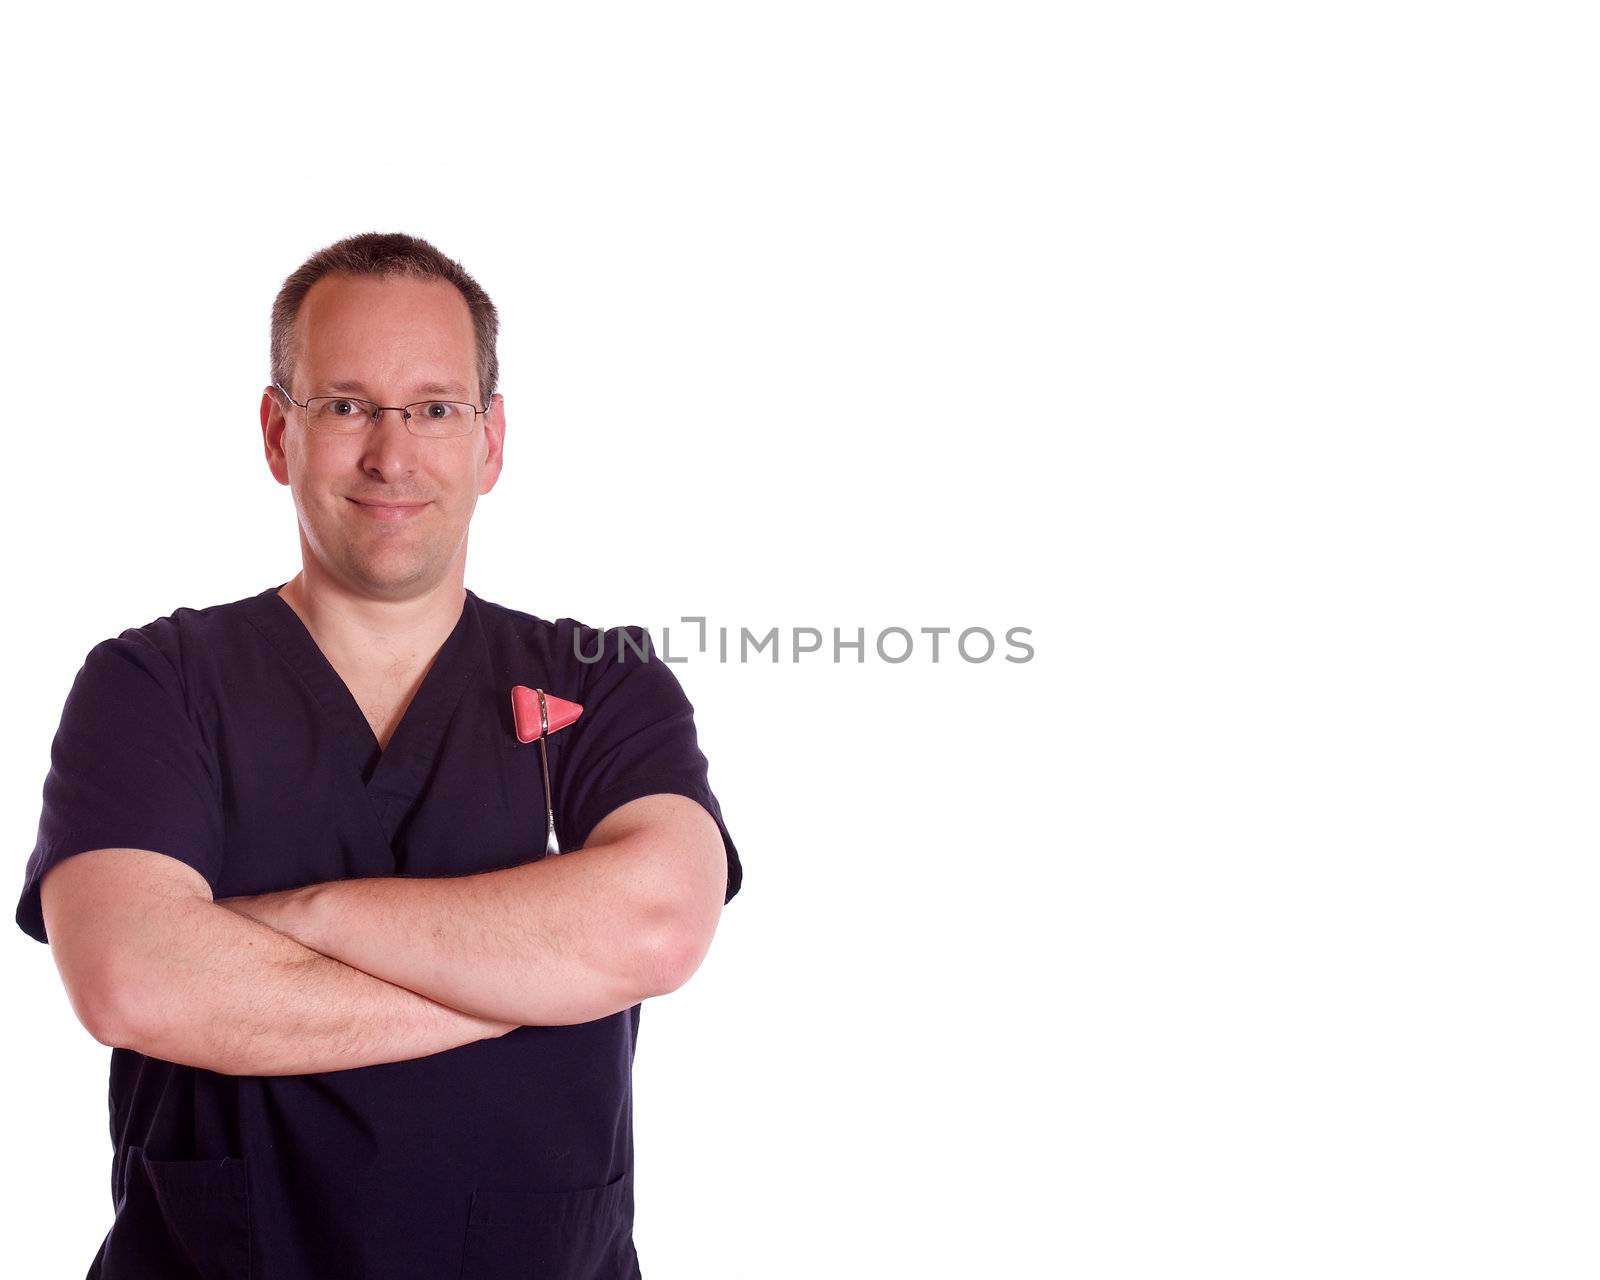 Physical therapist with a reflex hammer on a white background